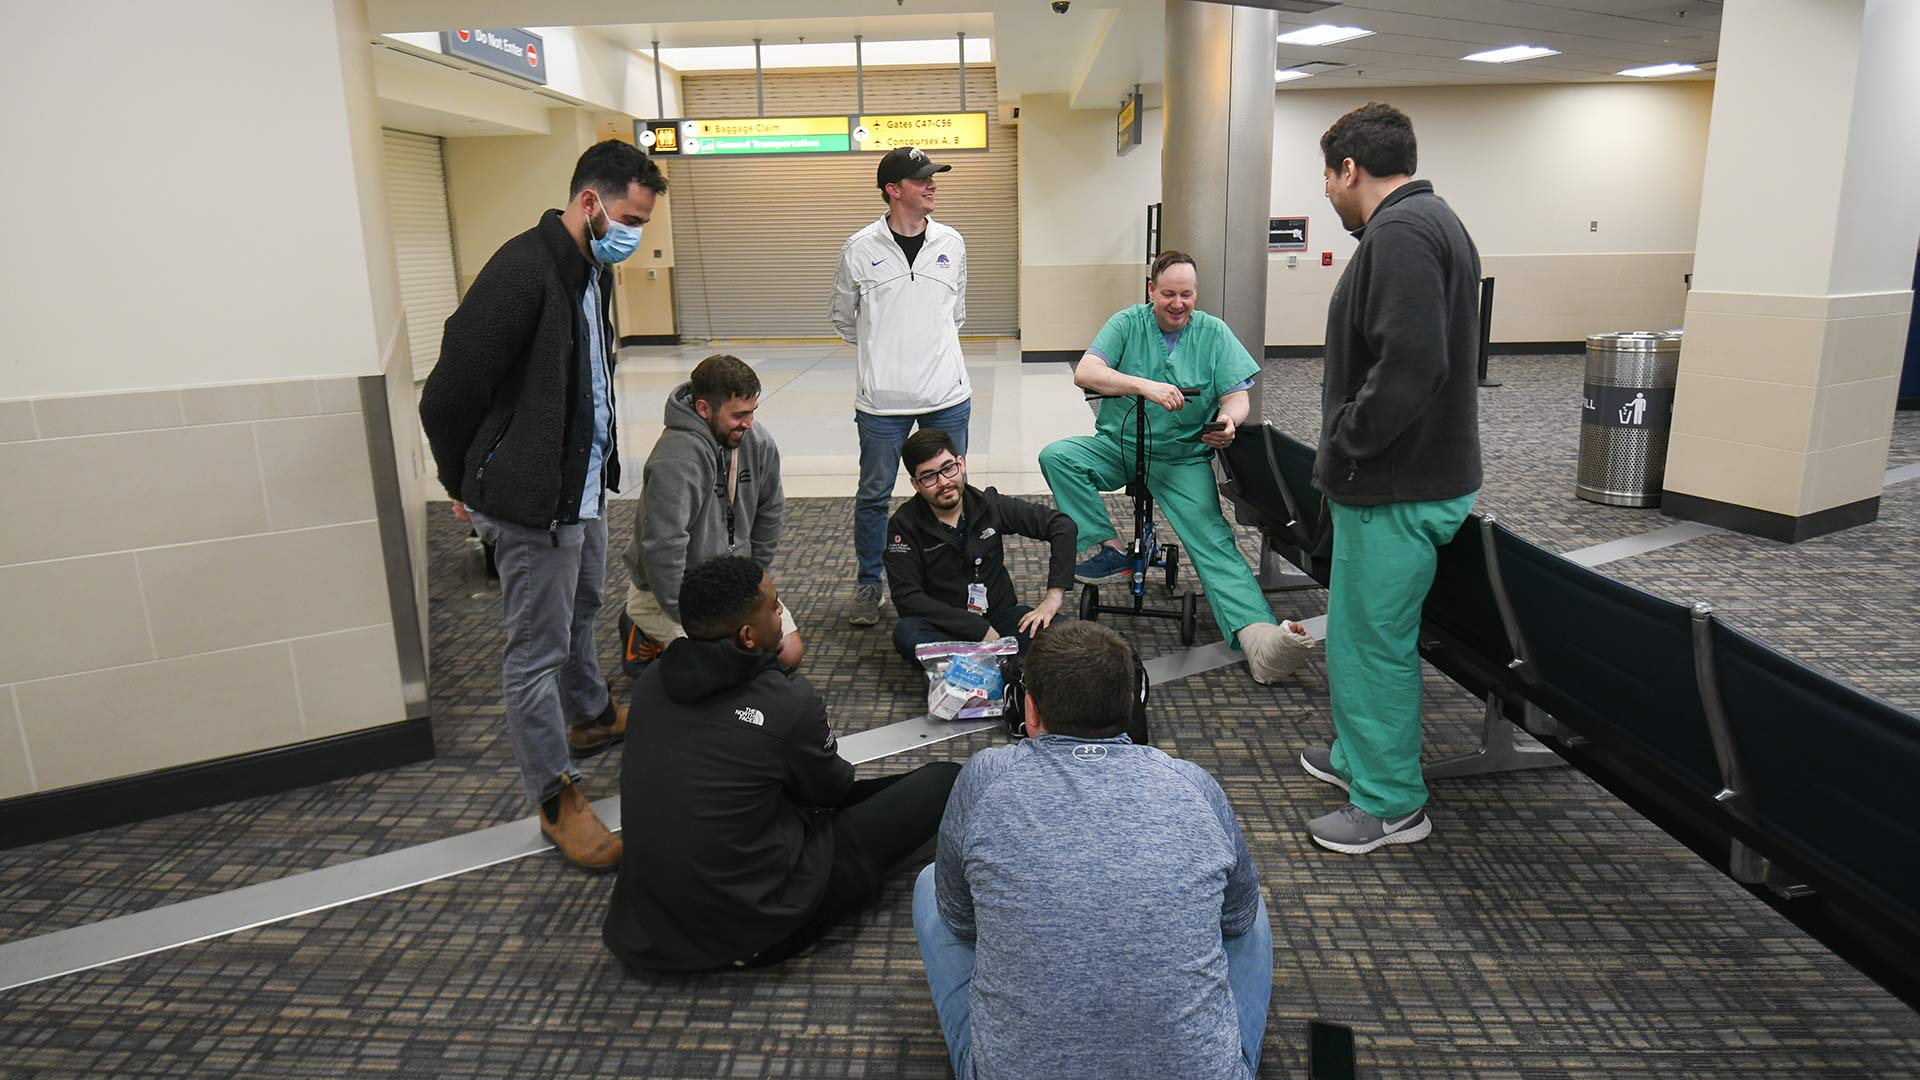 Students talking in the airport